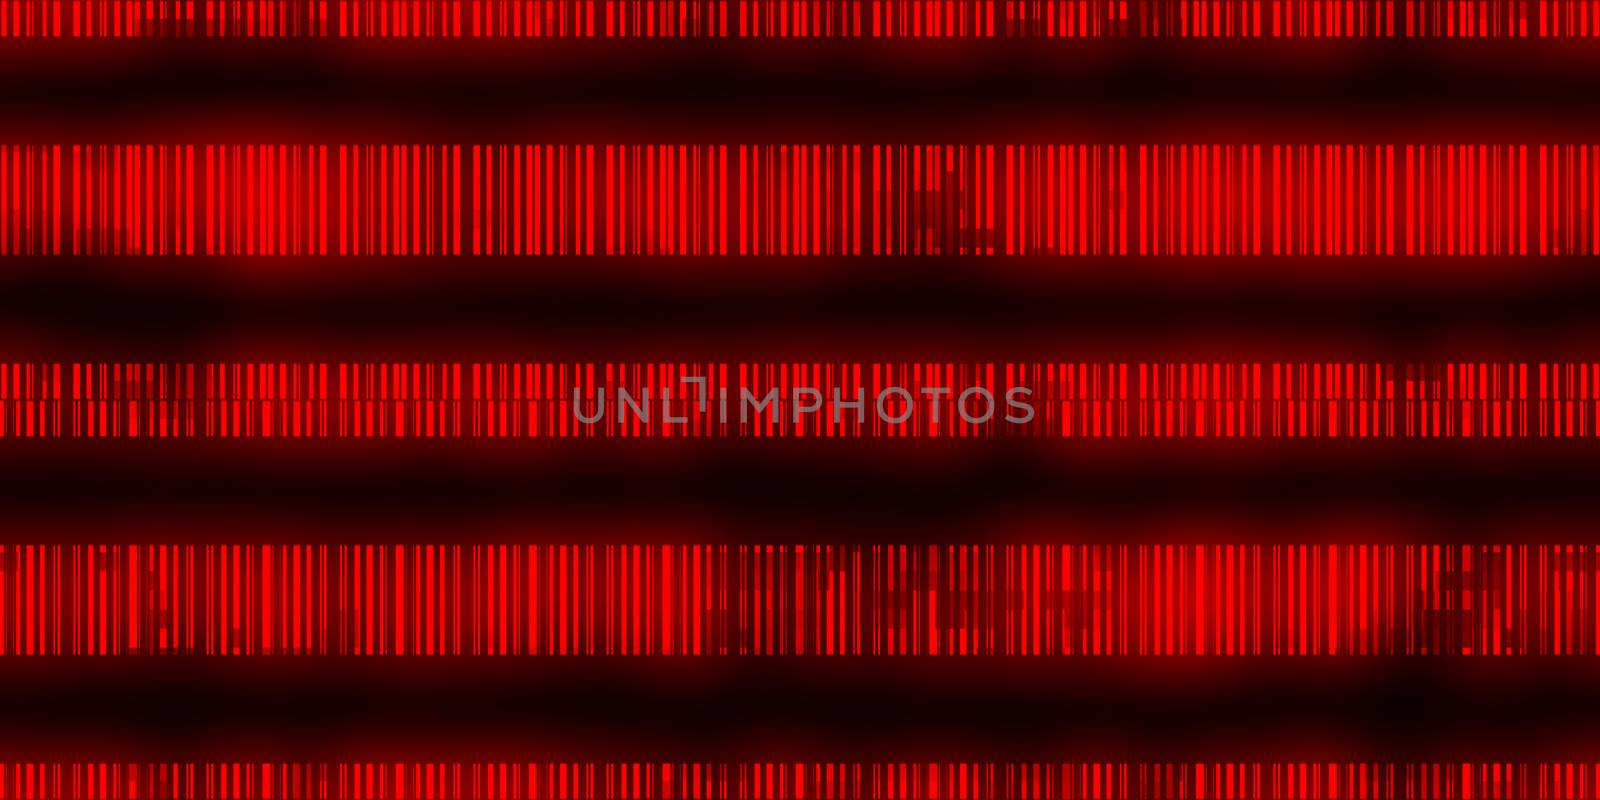 Red Dna Data Code Background. Seamless Science Dna Data Code Output Sequence. Human Individuality Code Backdrops.